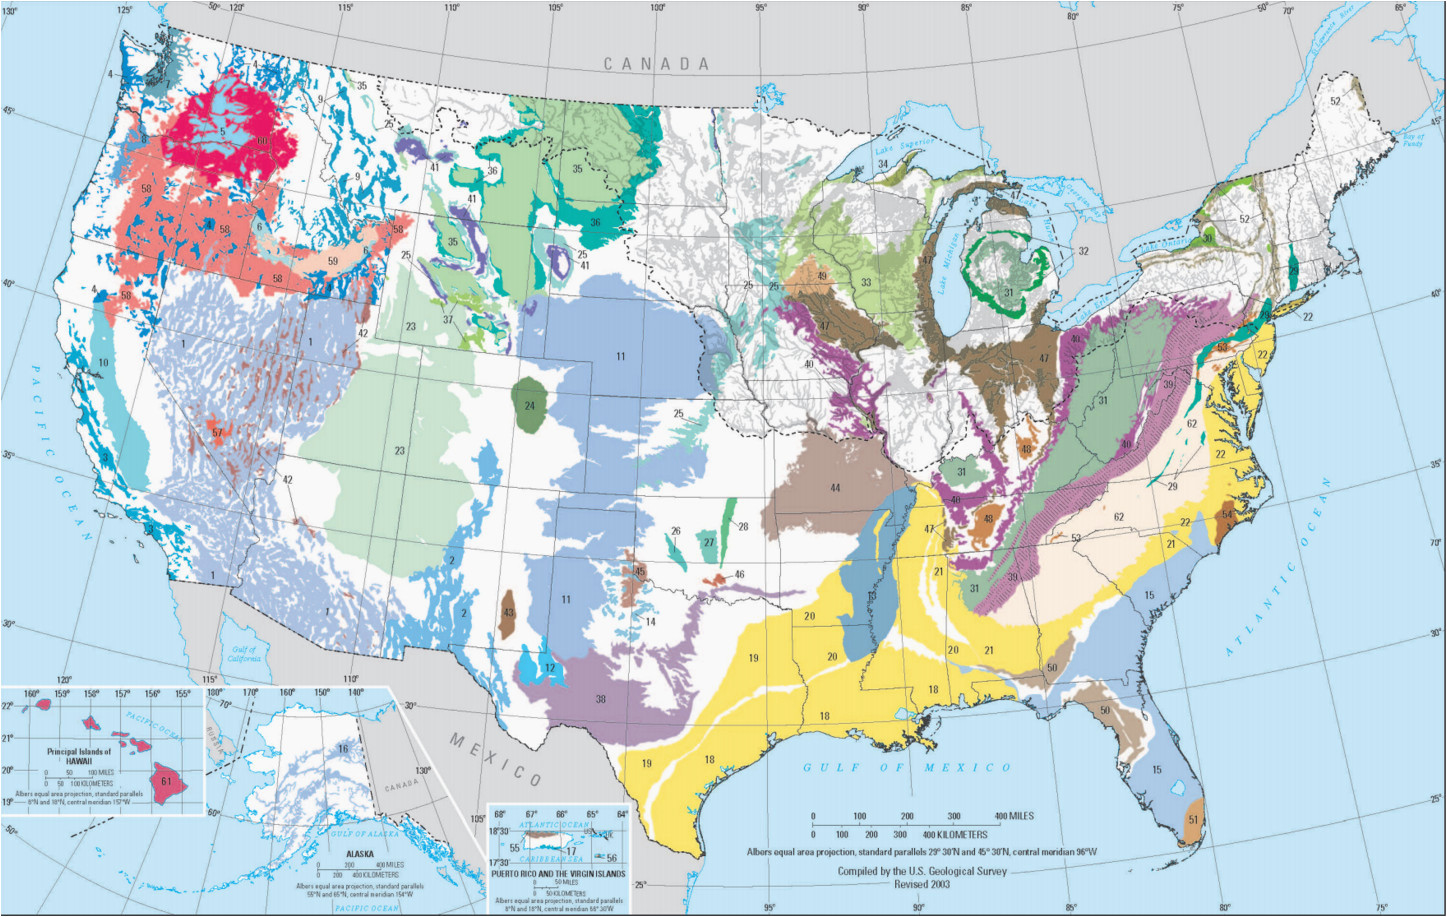 Texas Aquifers Map California Water Resources Map National Aquifers Of the United